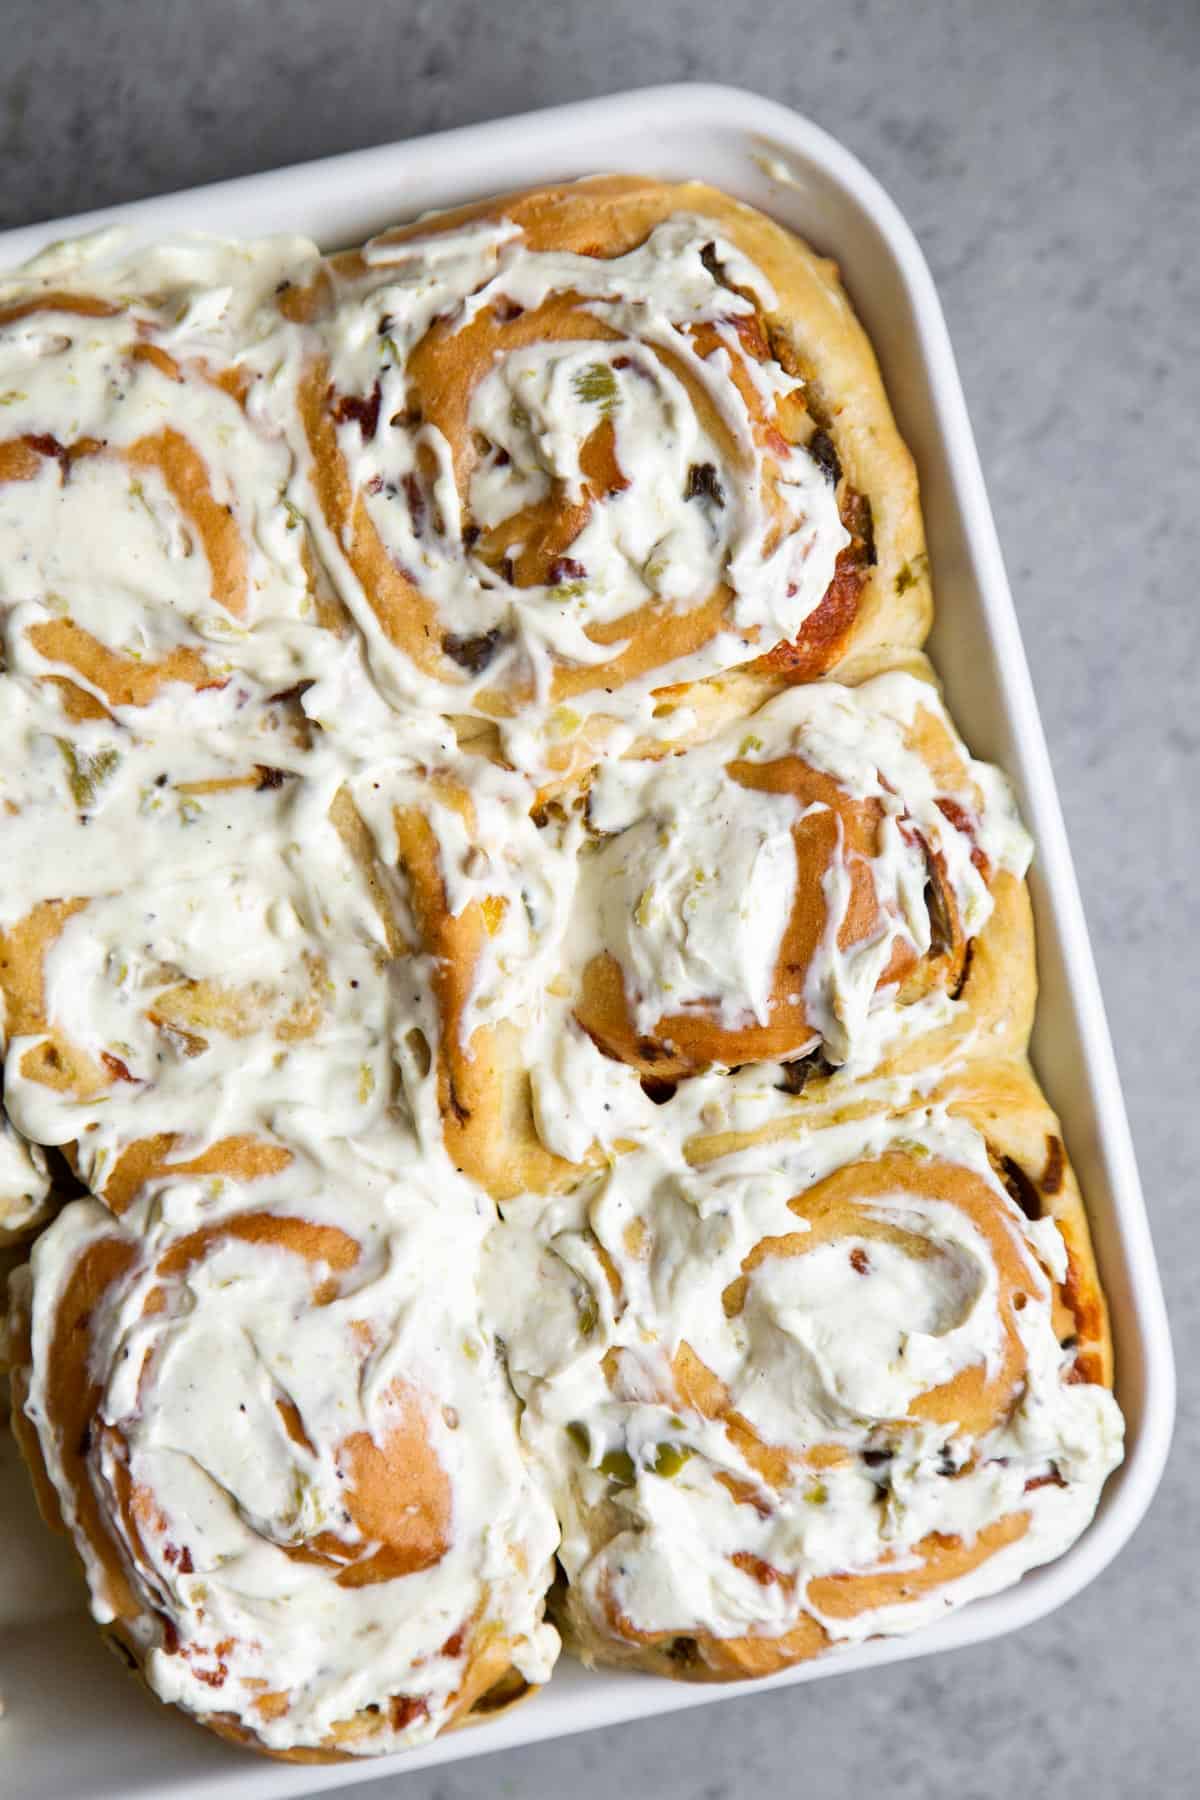 Roasted Green Chile Cheddar Rolls with Cream Cheese